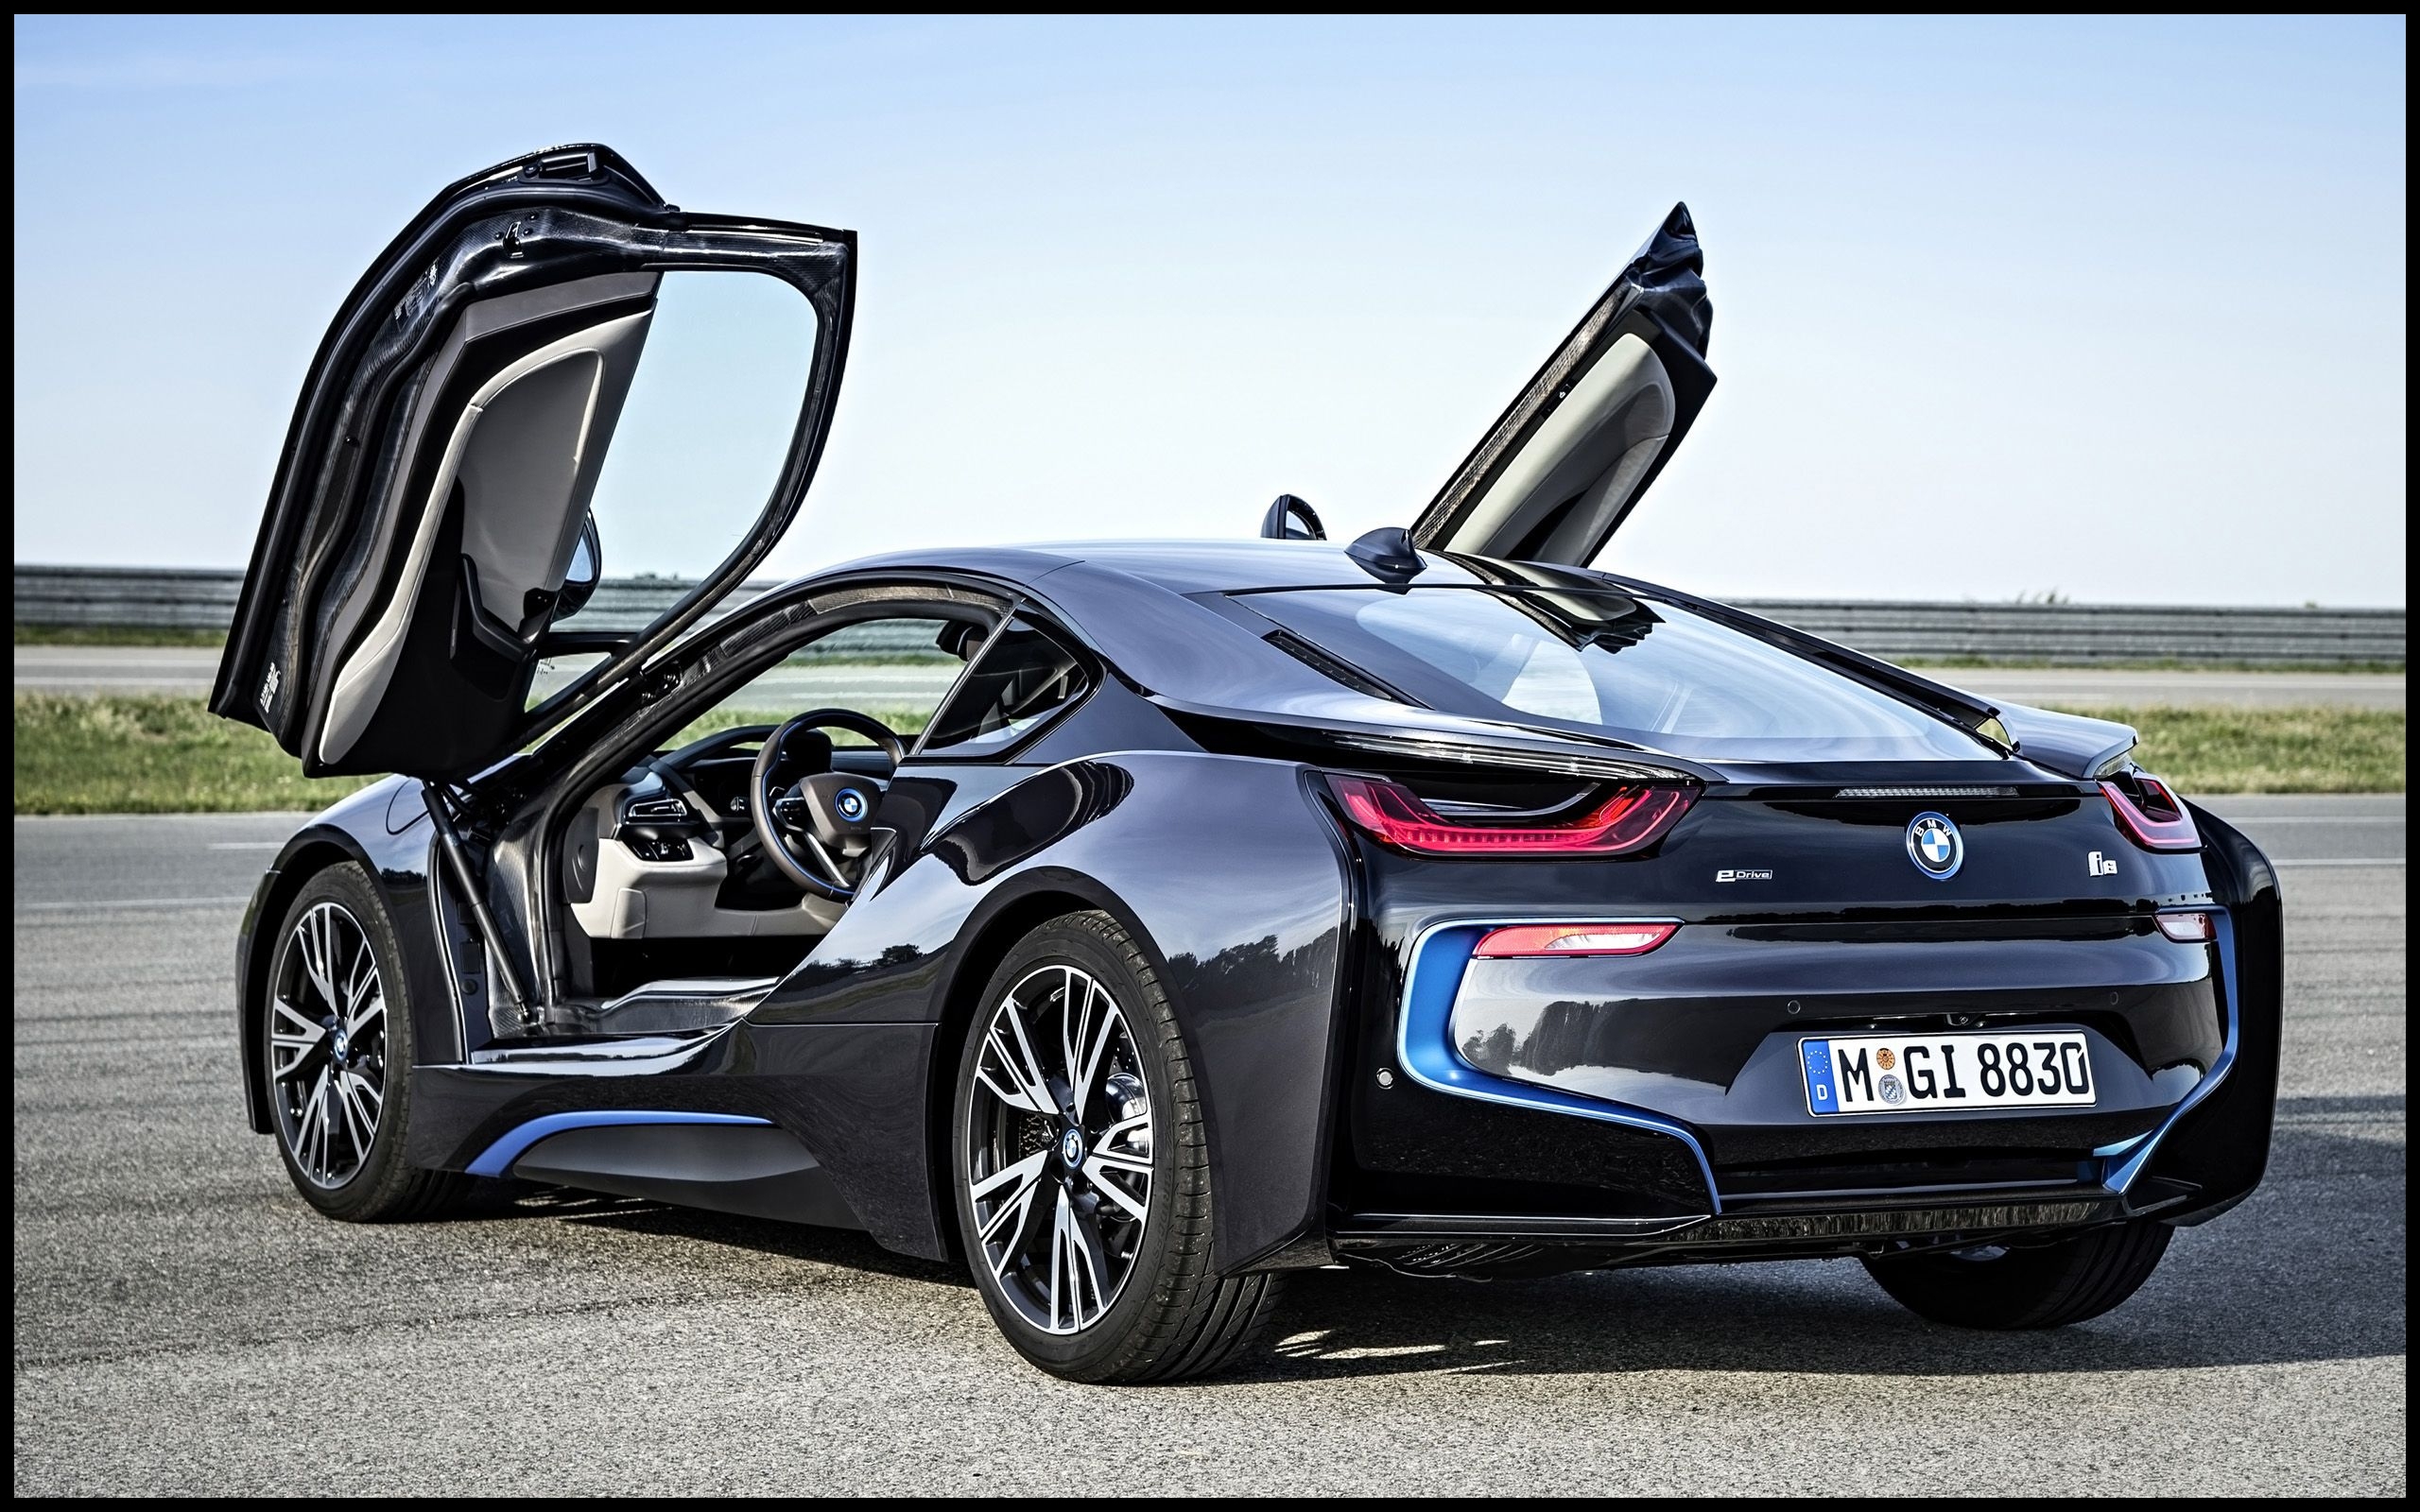 Bmw with butterfly Doors Bmw I8